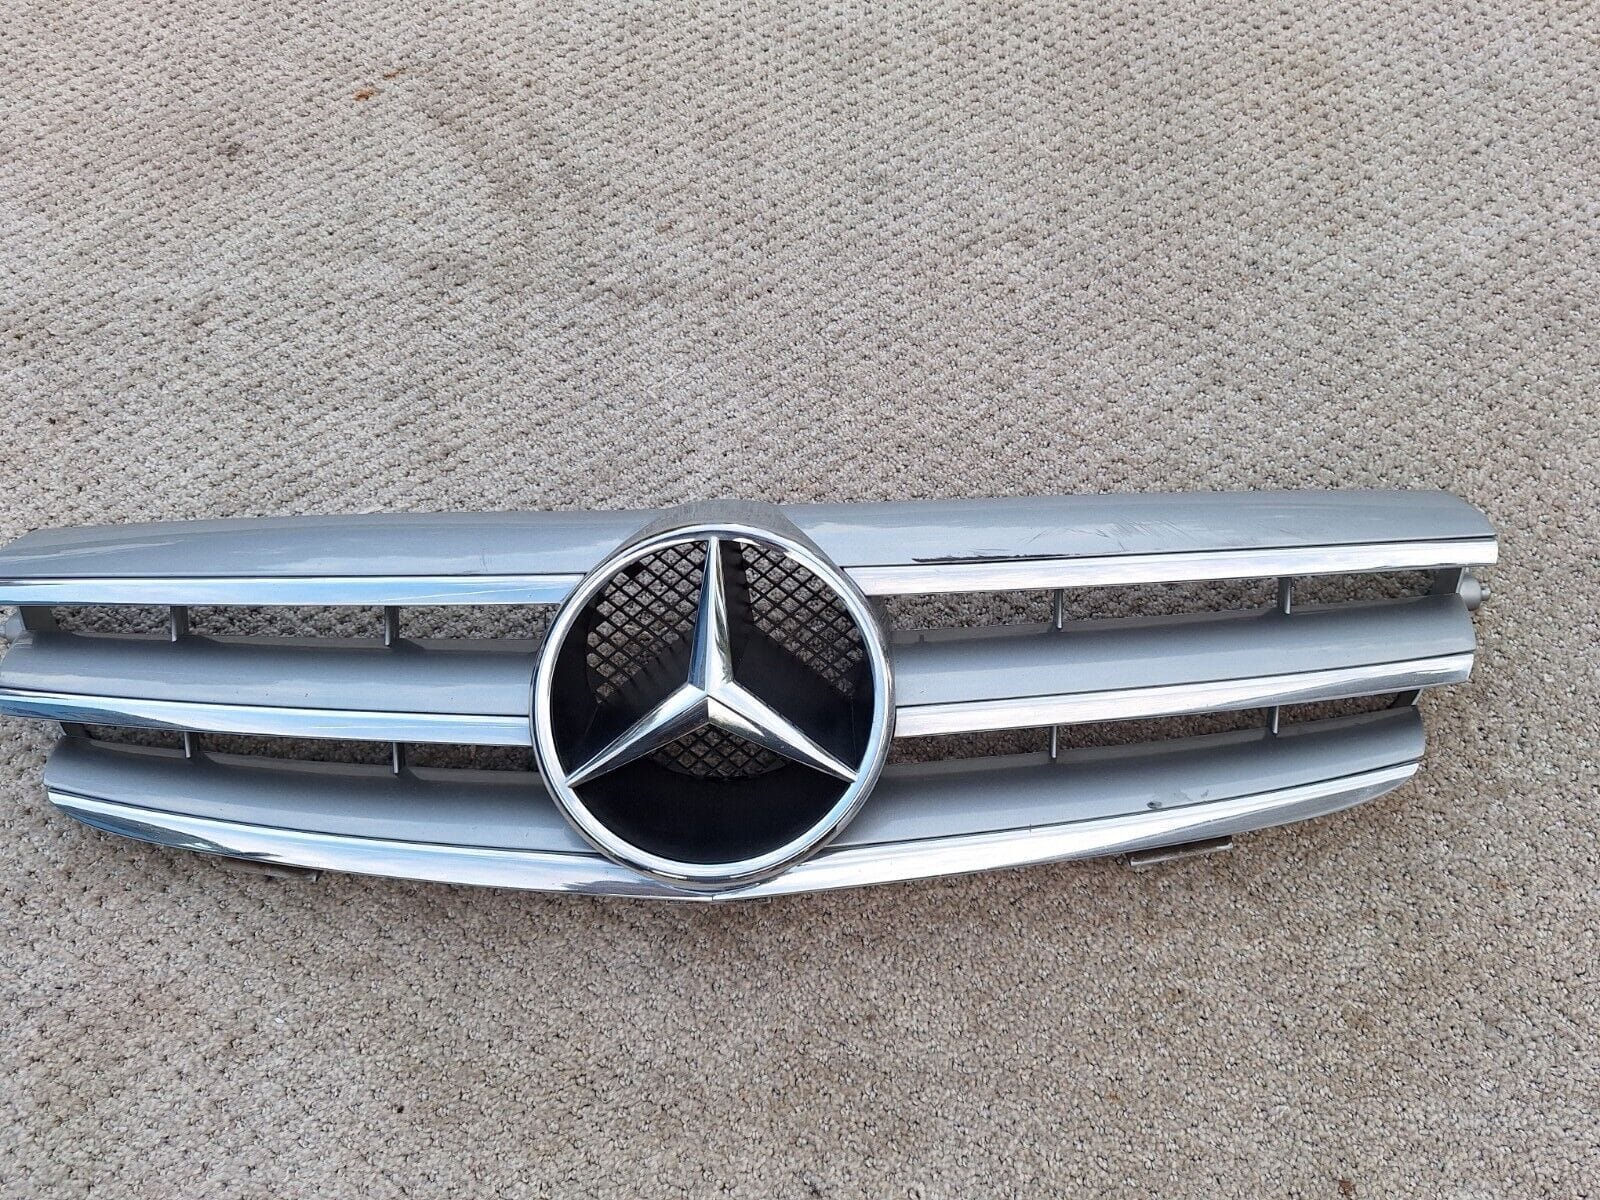 Exterior Body Parts - WTB: W209 - CLK - 2006 - 2009 OEM Grille (3 fin) - New or Used - 2006 to 2009 Mercedes-Benz CLK55 AMG - Los Angeles, CA 90025, United States